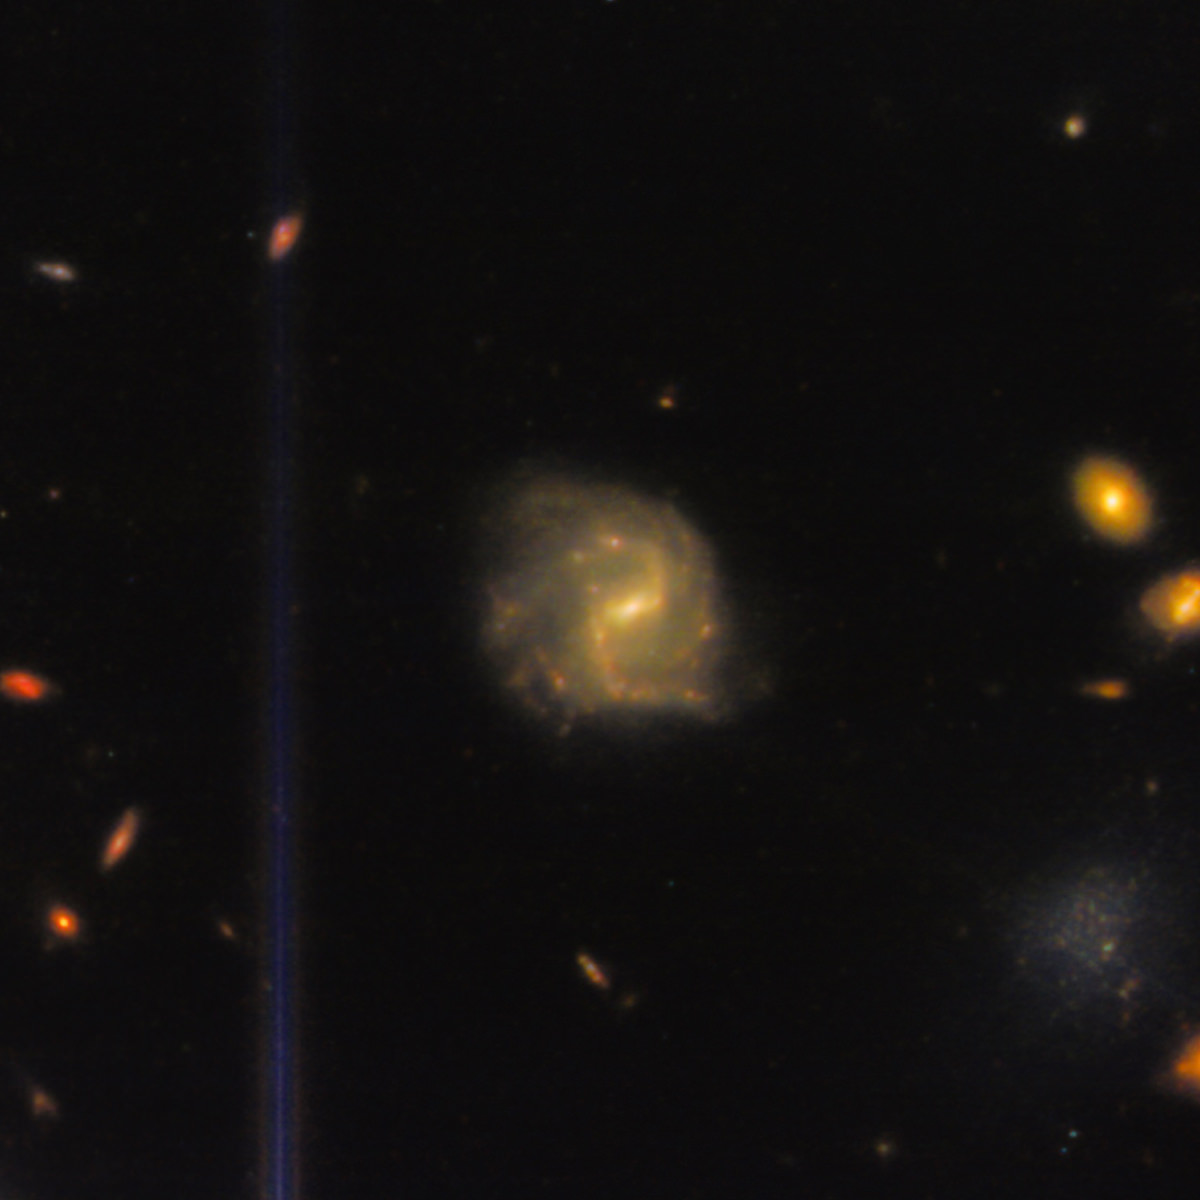 Zooming closer... more galaxies!